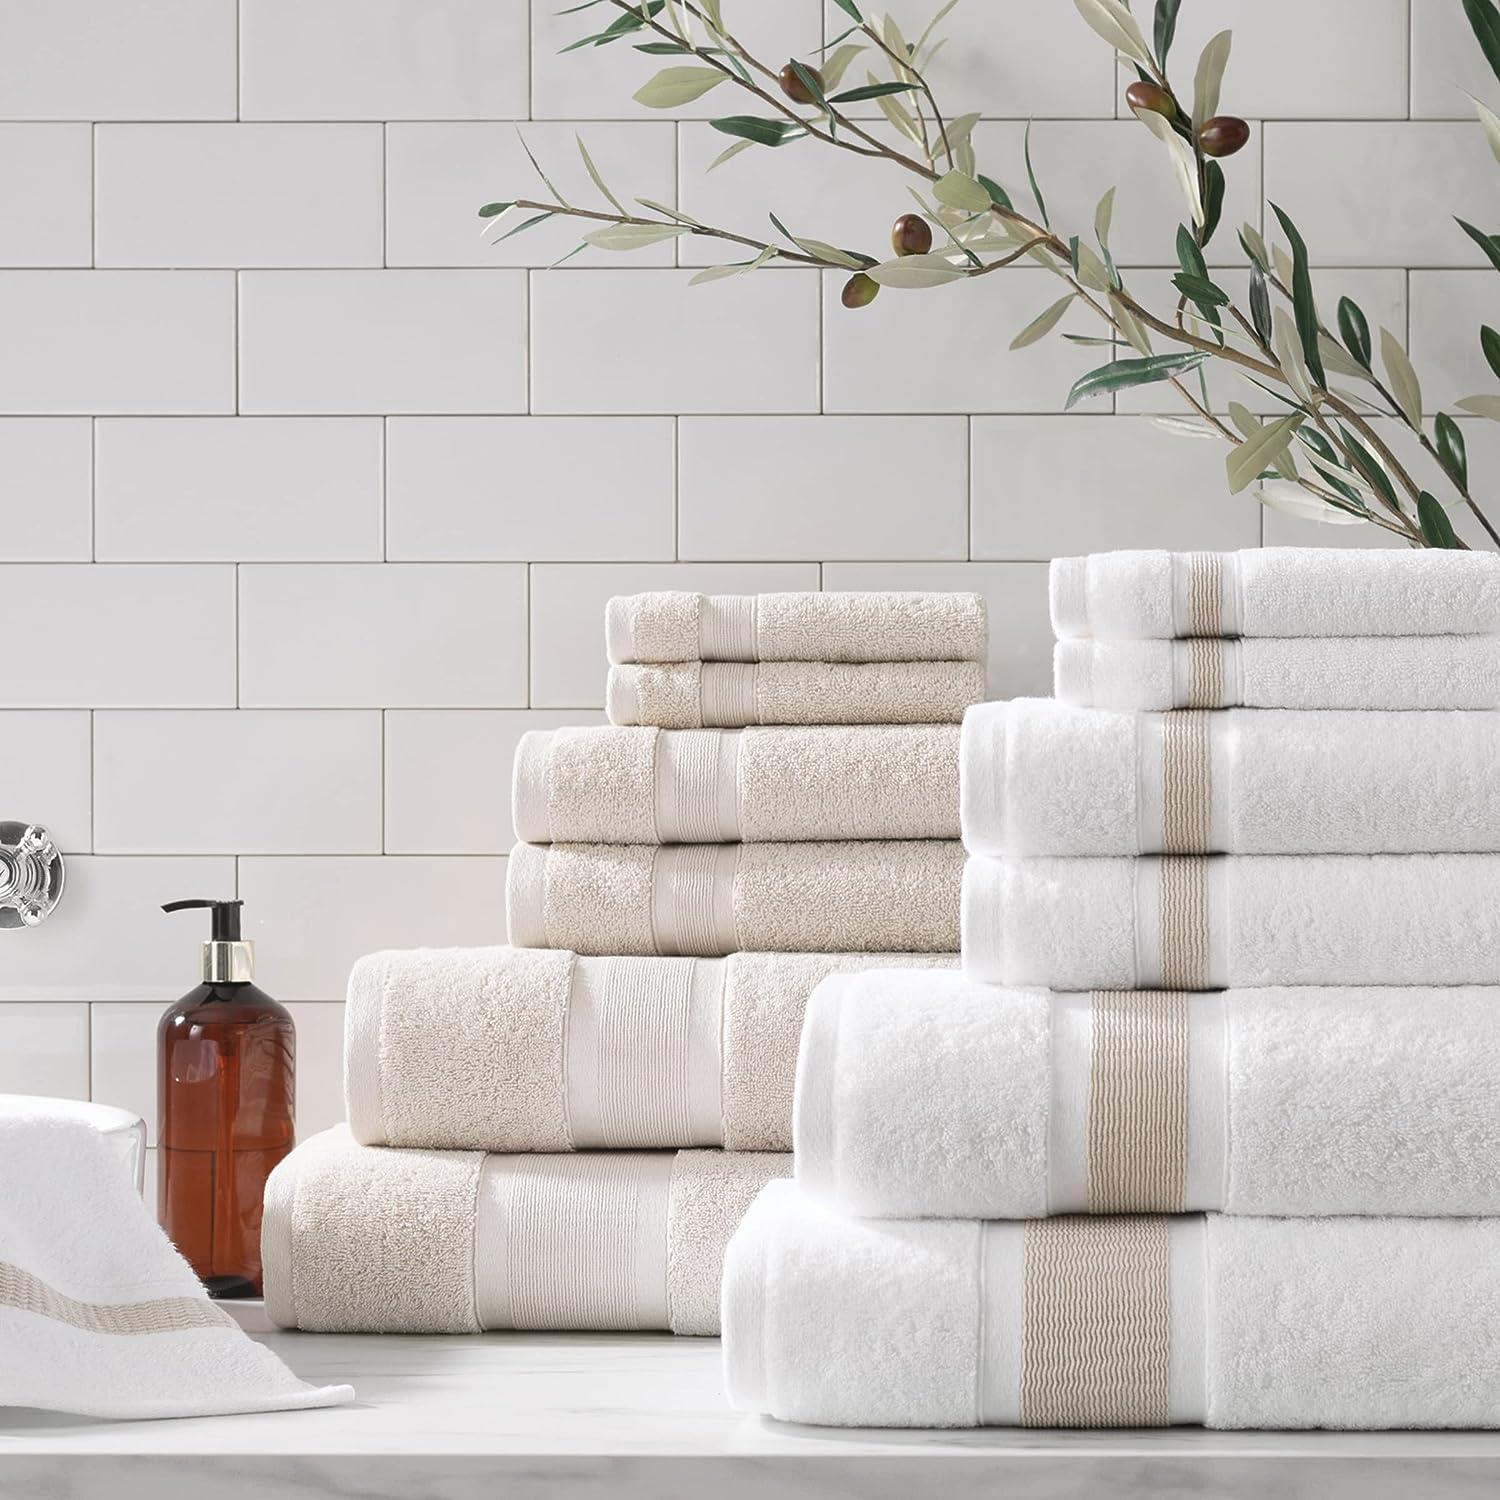 Luxury Turkish Hand Towels, 4-pack, 18x32, 600 GSM, Soft, Plush, Aston &  Arden Bathroom Towels, Solid Color Options 